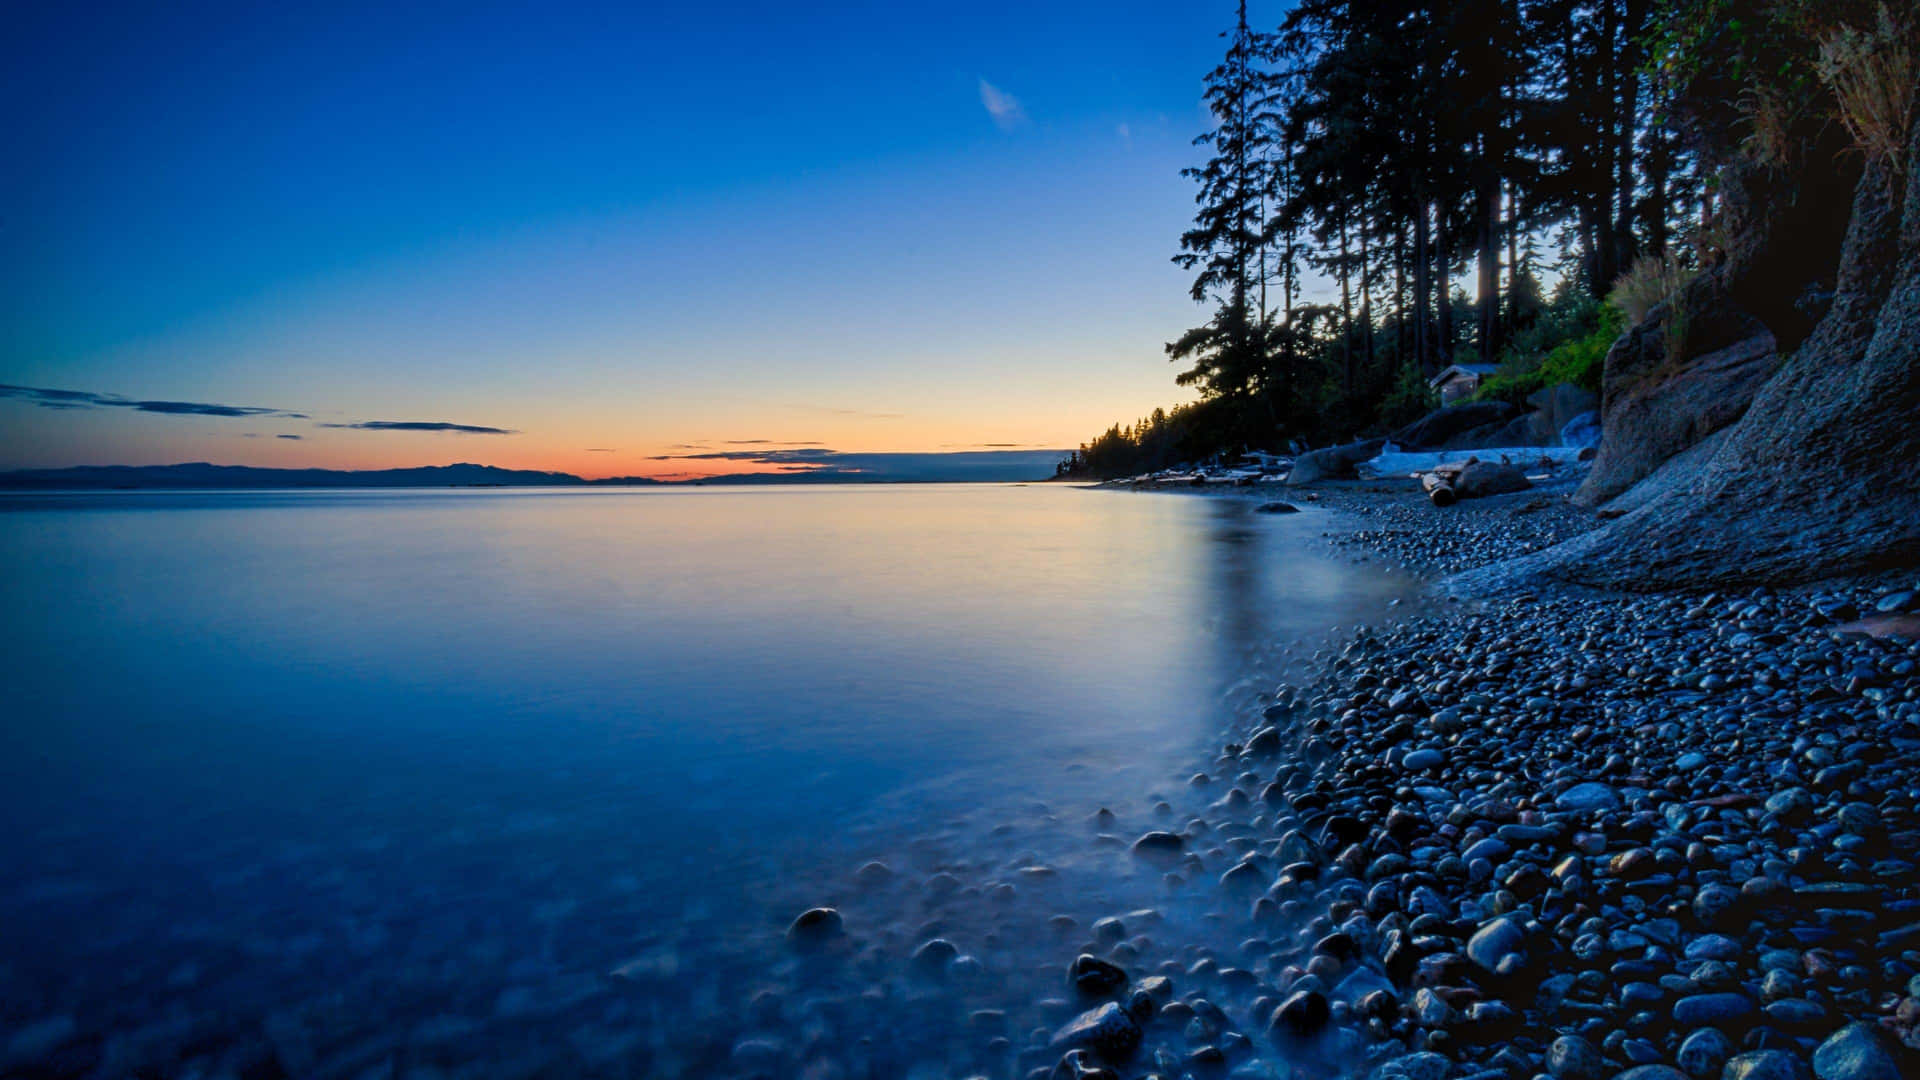 A Beach With Rocks And Trees At Sunset Wallpaper